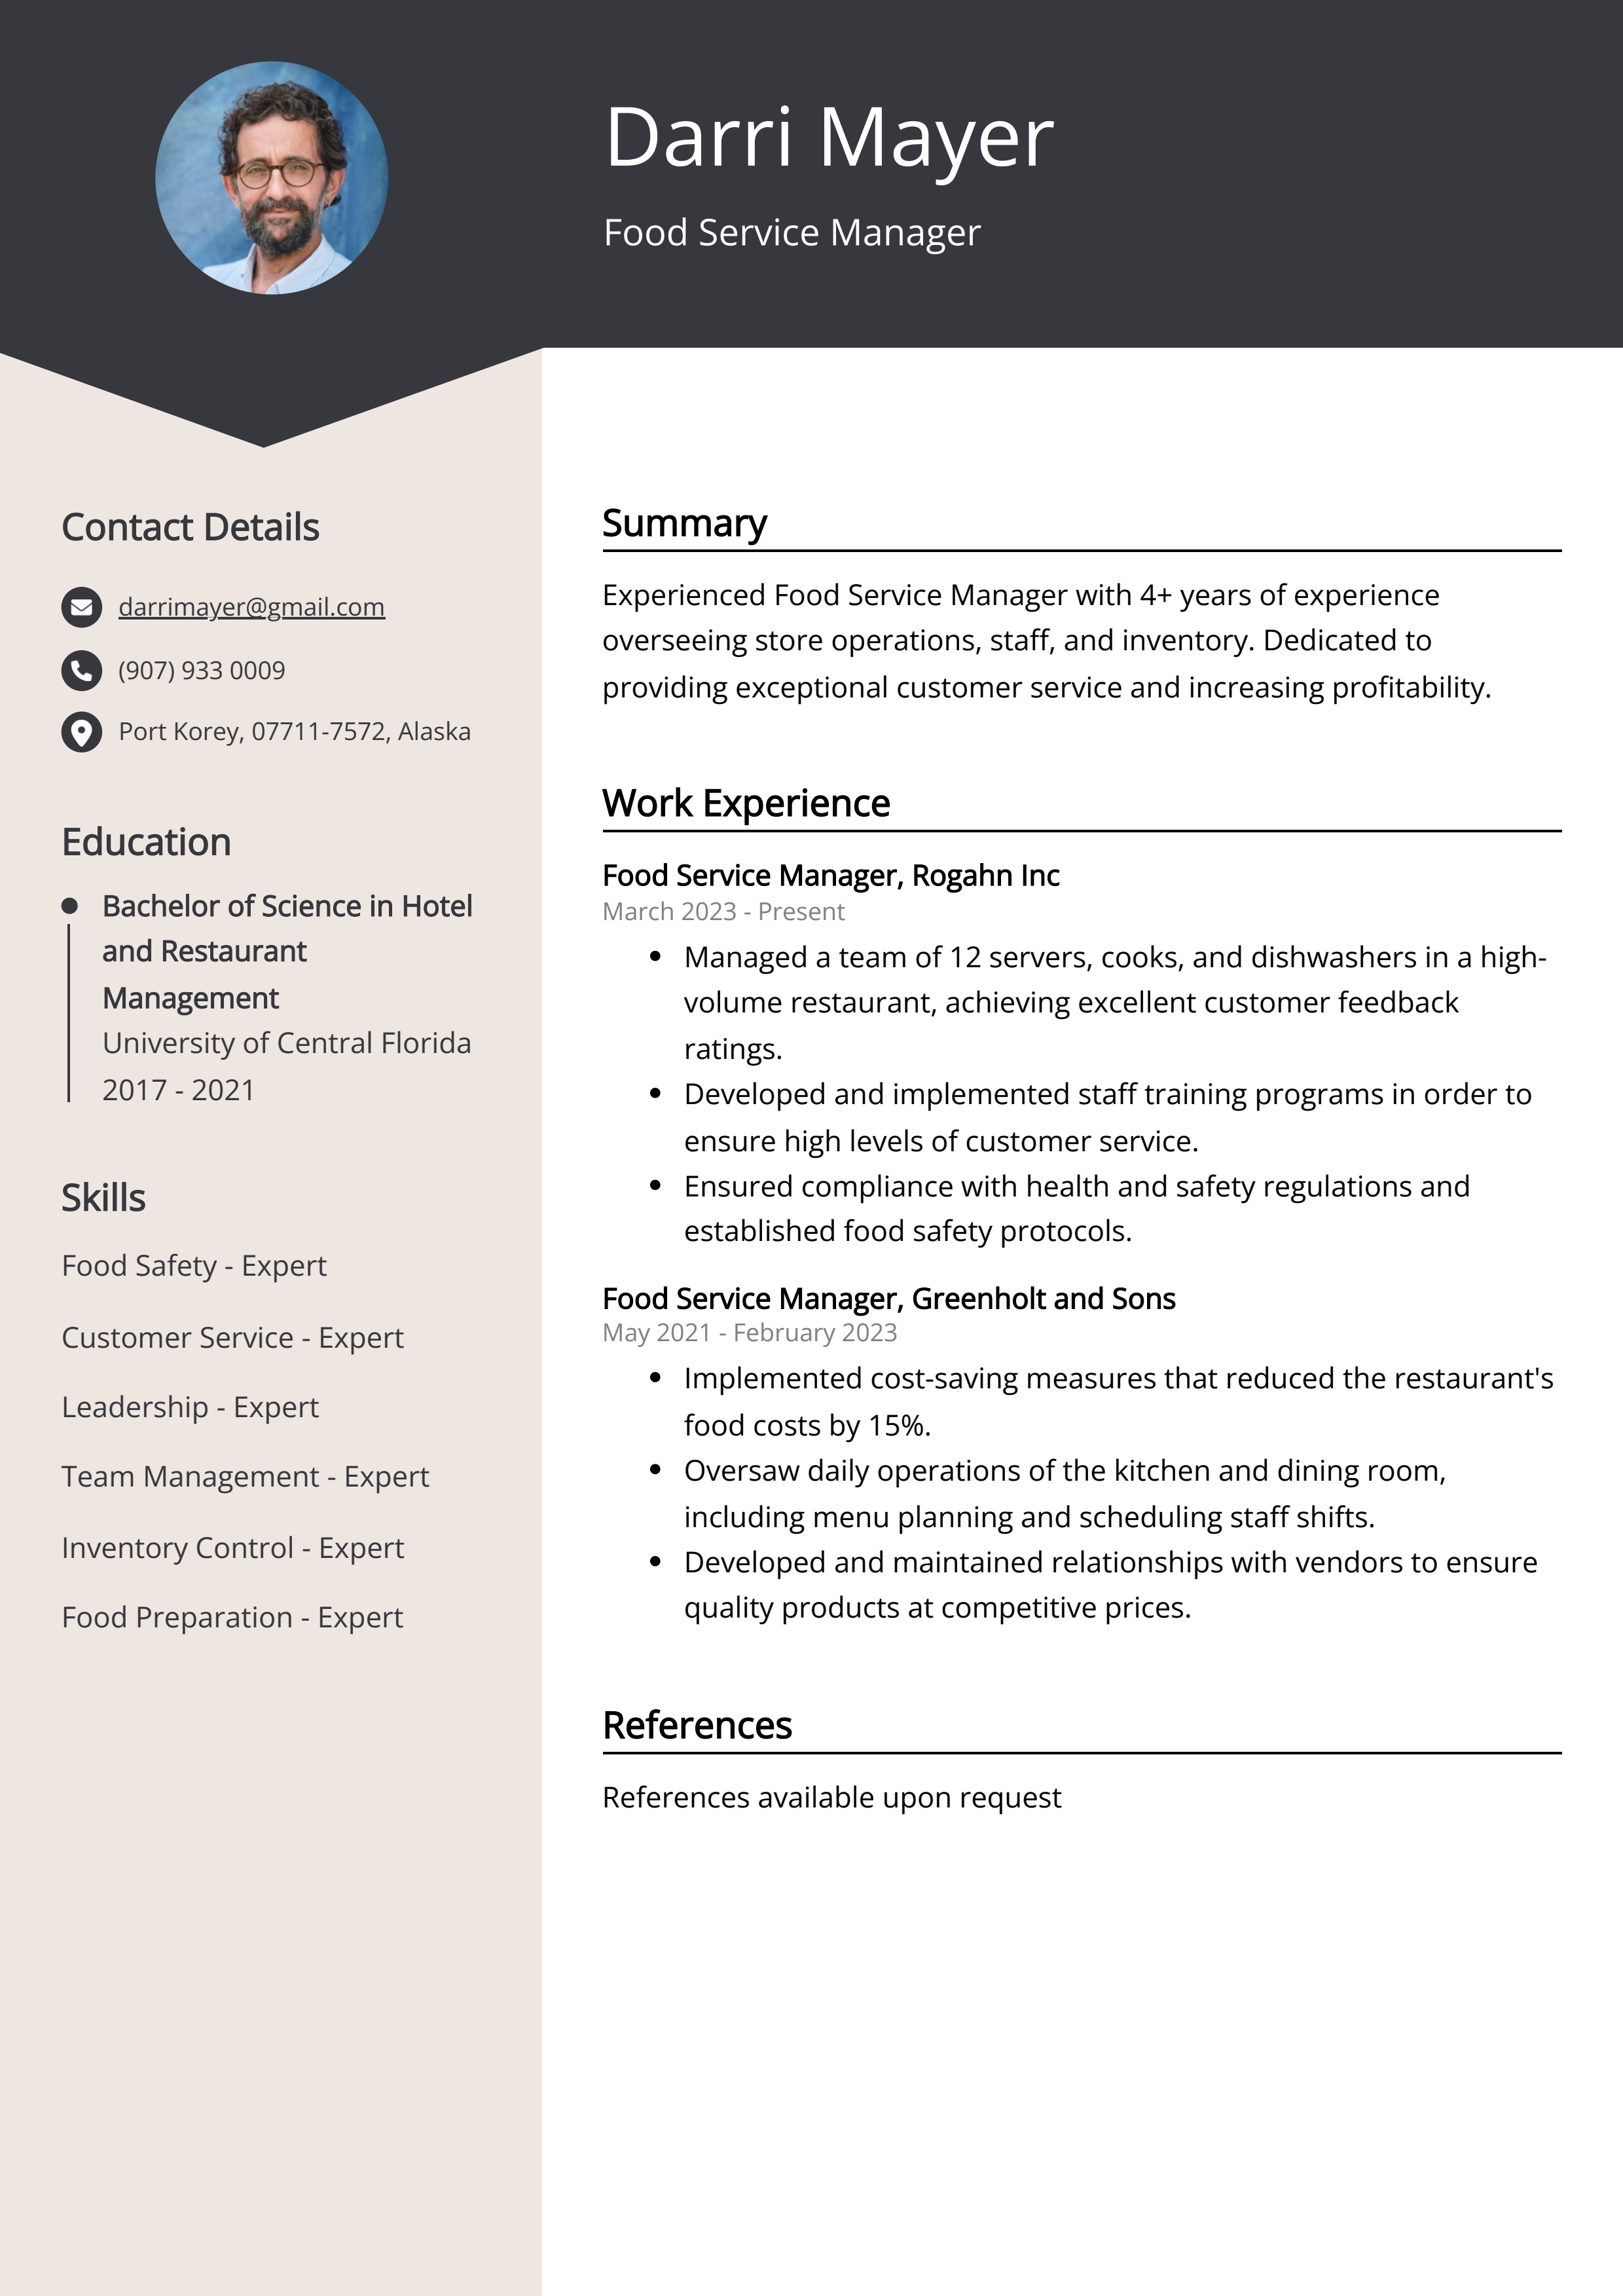 Food Service Manager CV Example